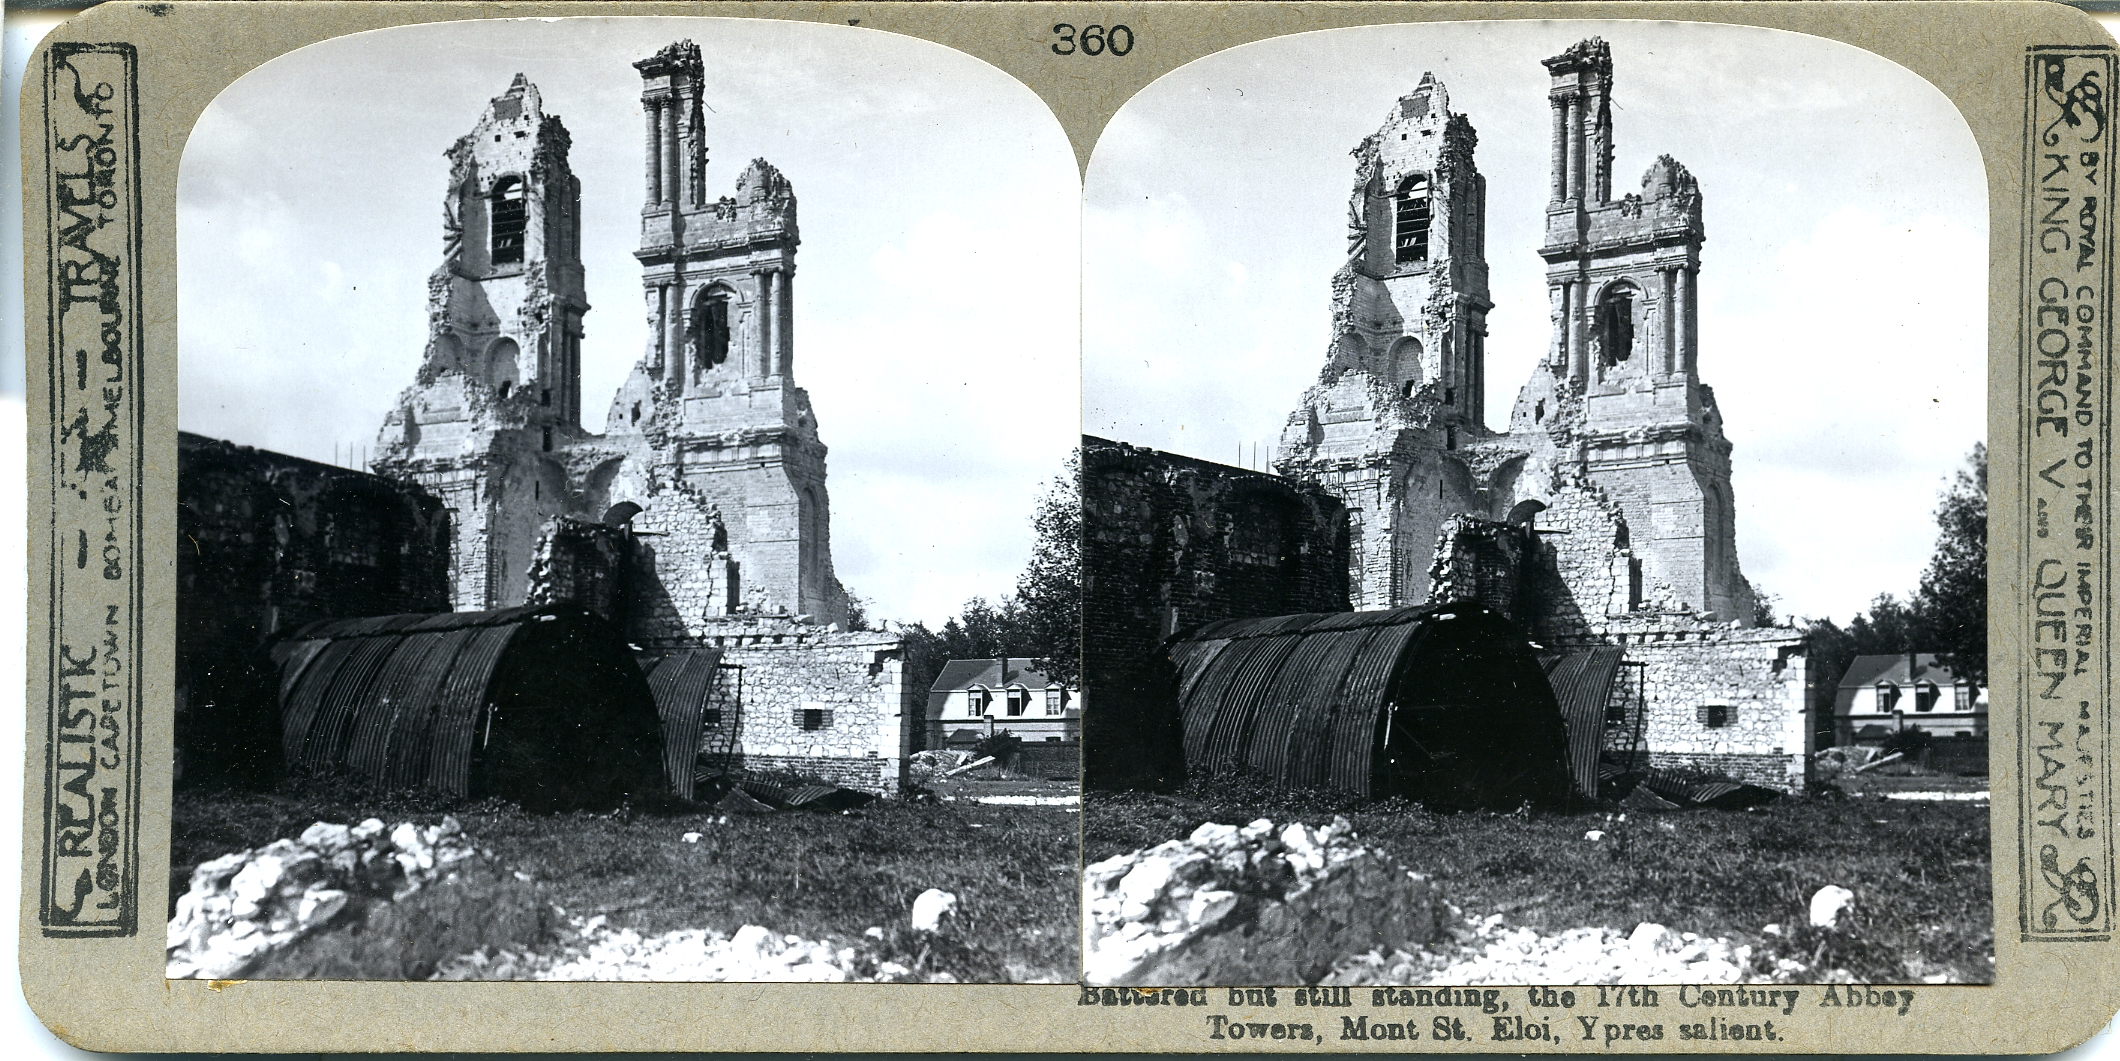 Battered but still standing, the 17th Century Abbey towers. Mont St. Eloi, Ypres salient